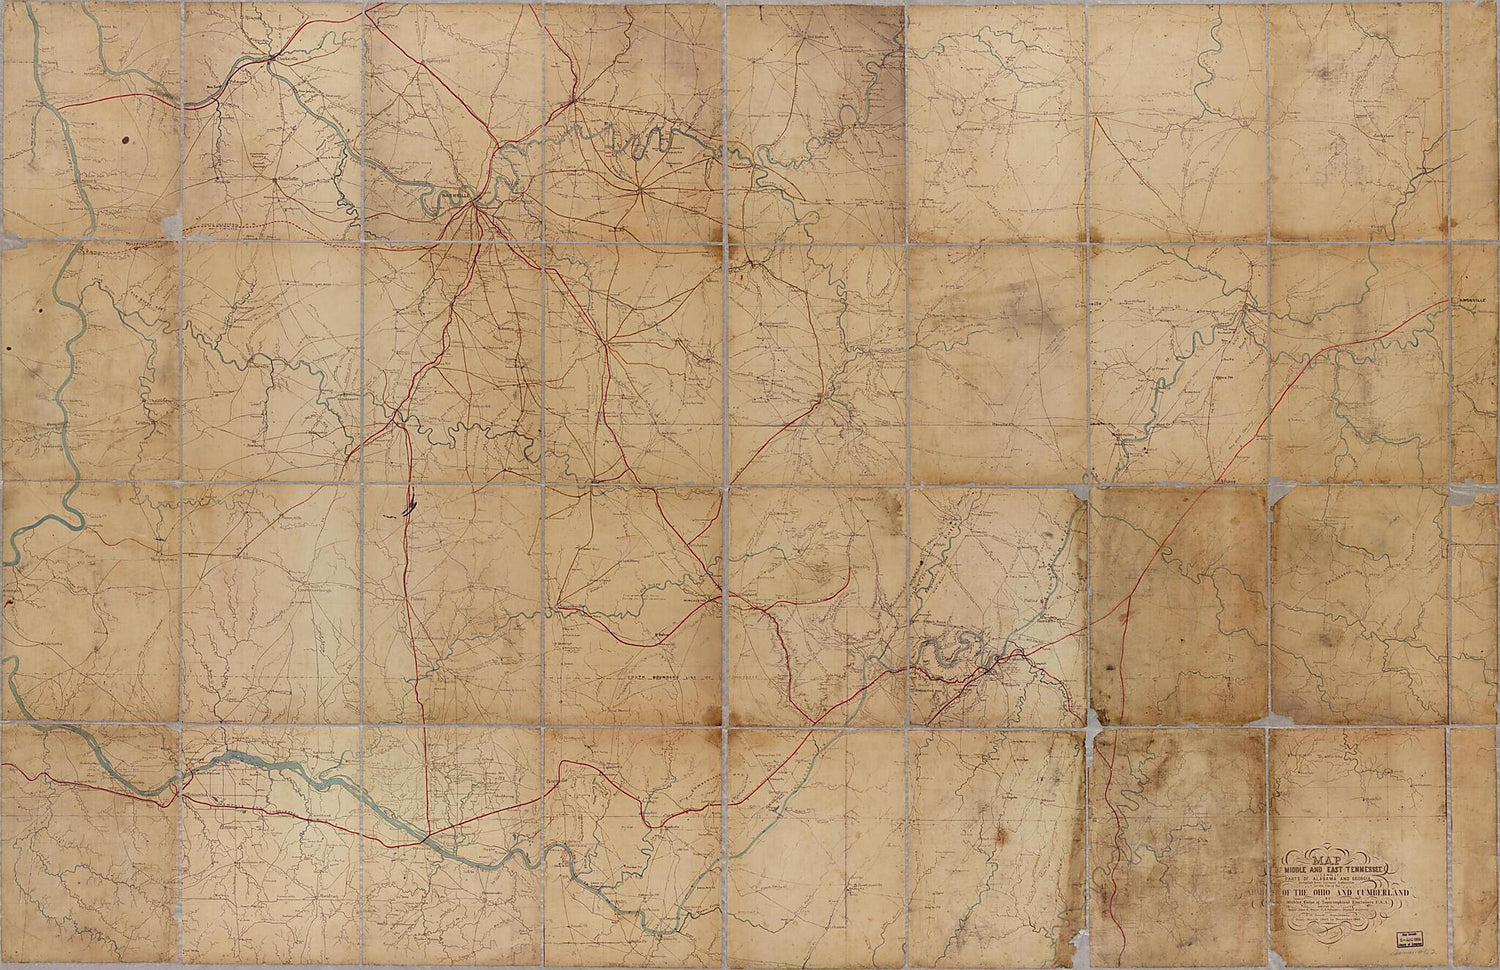 This old map of Map of Middle and East Tennessee and Parts of Alabama and Georgia from 1862 was created by N. (Nathaniel) Michler in 1862